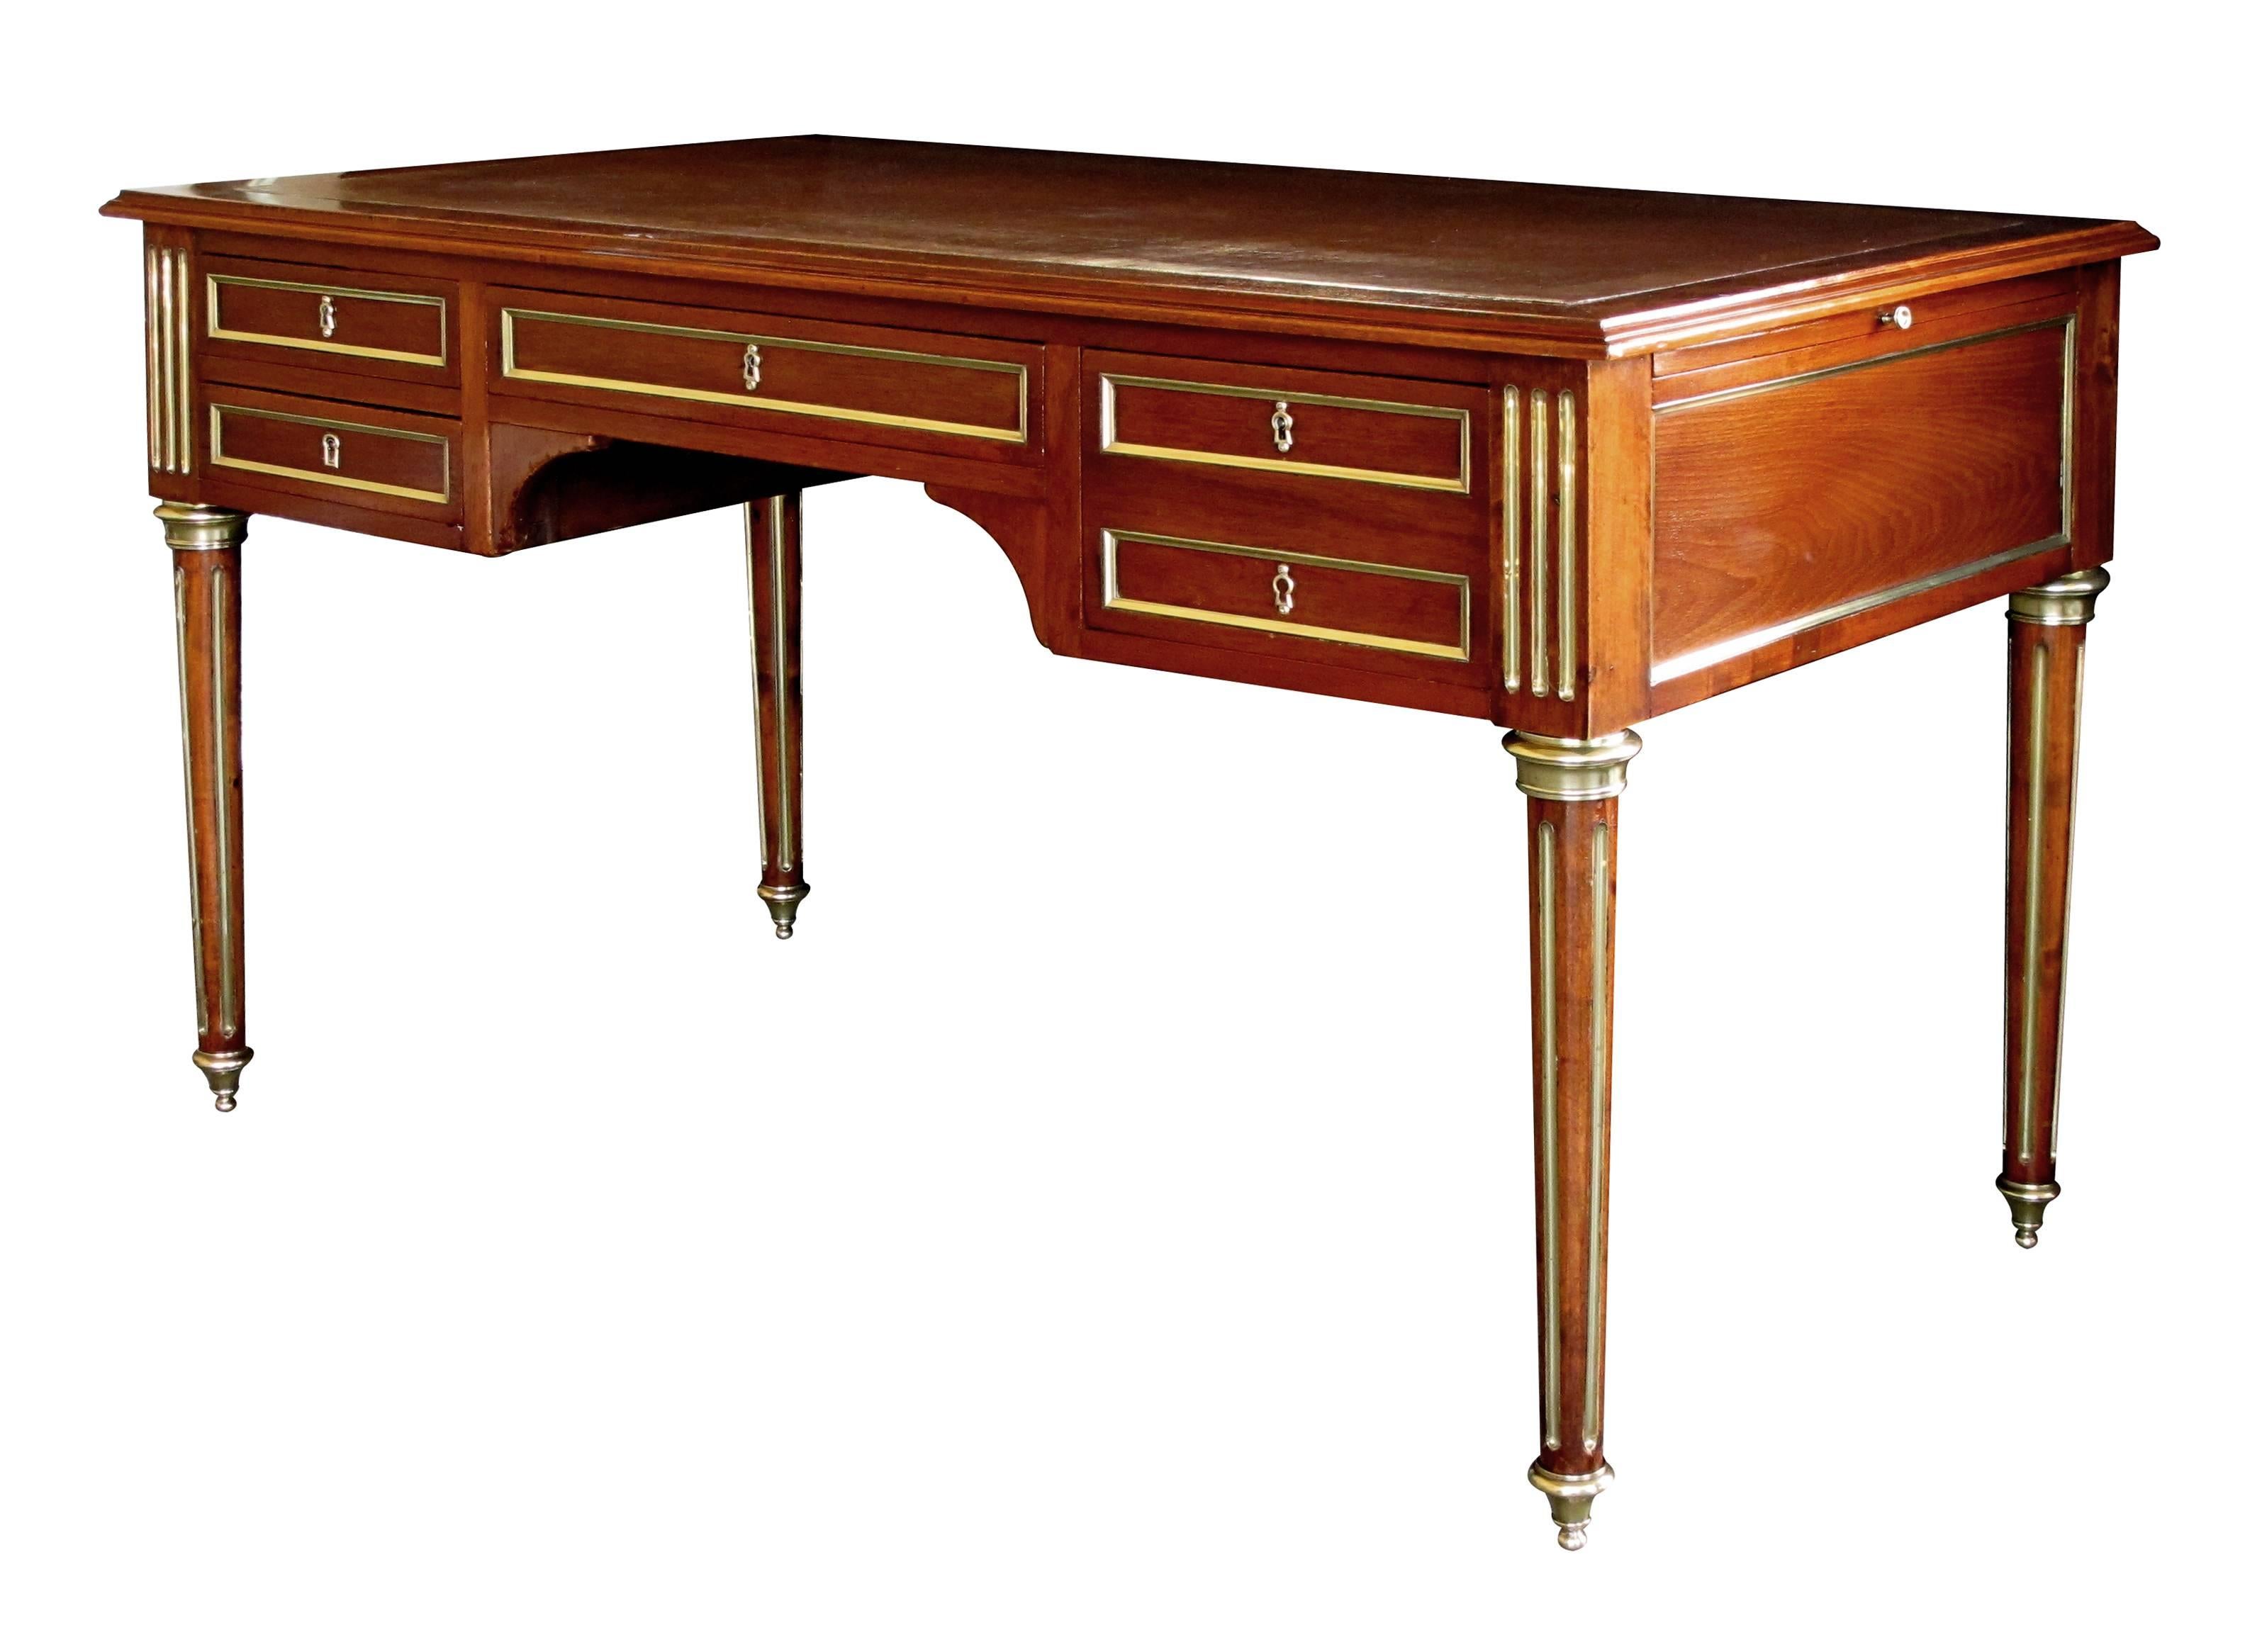 A beautiful and well-crafted French Louis XVI style mahogany four-drawer writing desk with leather top and brass mounts; this truly elegant and good quality bureau plat with tooled russet leather top above brass-mounted drawers; the sides with